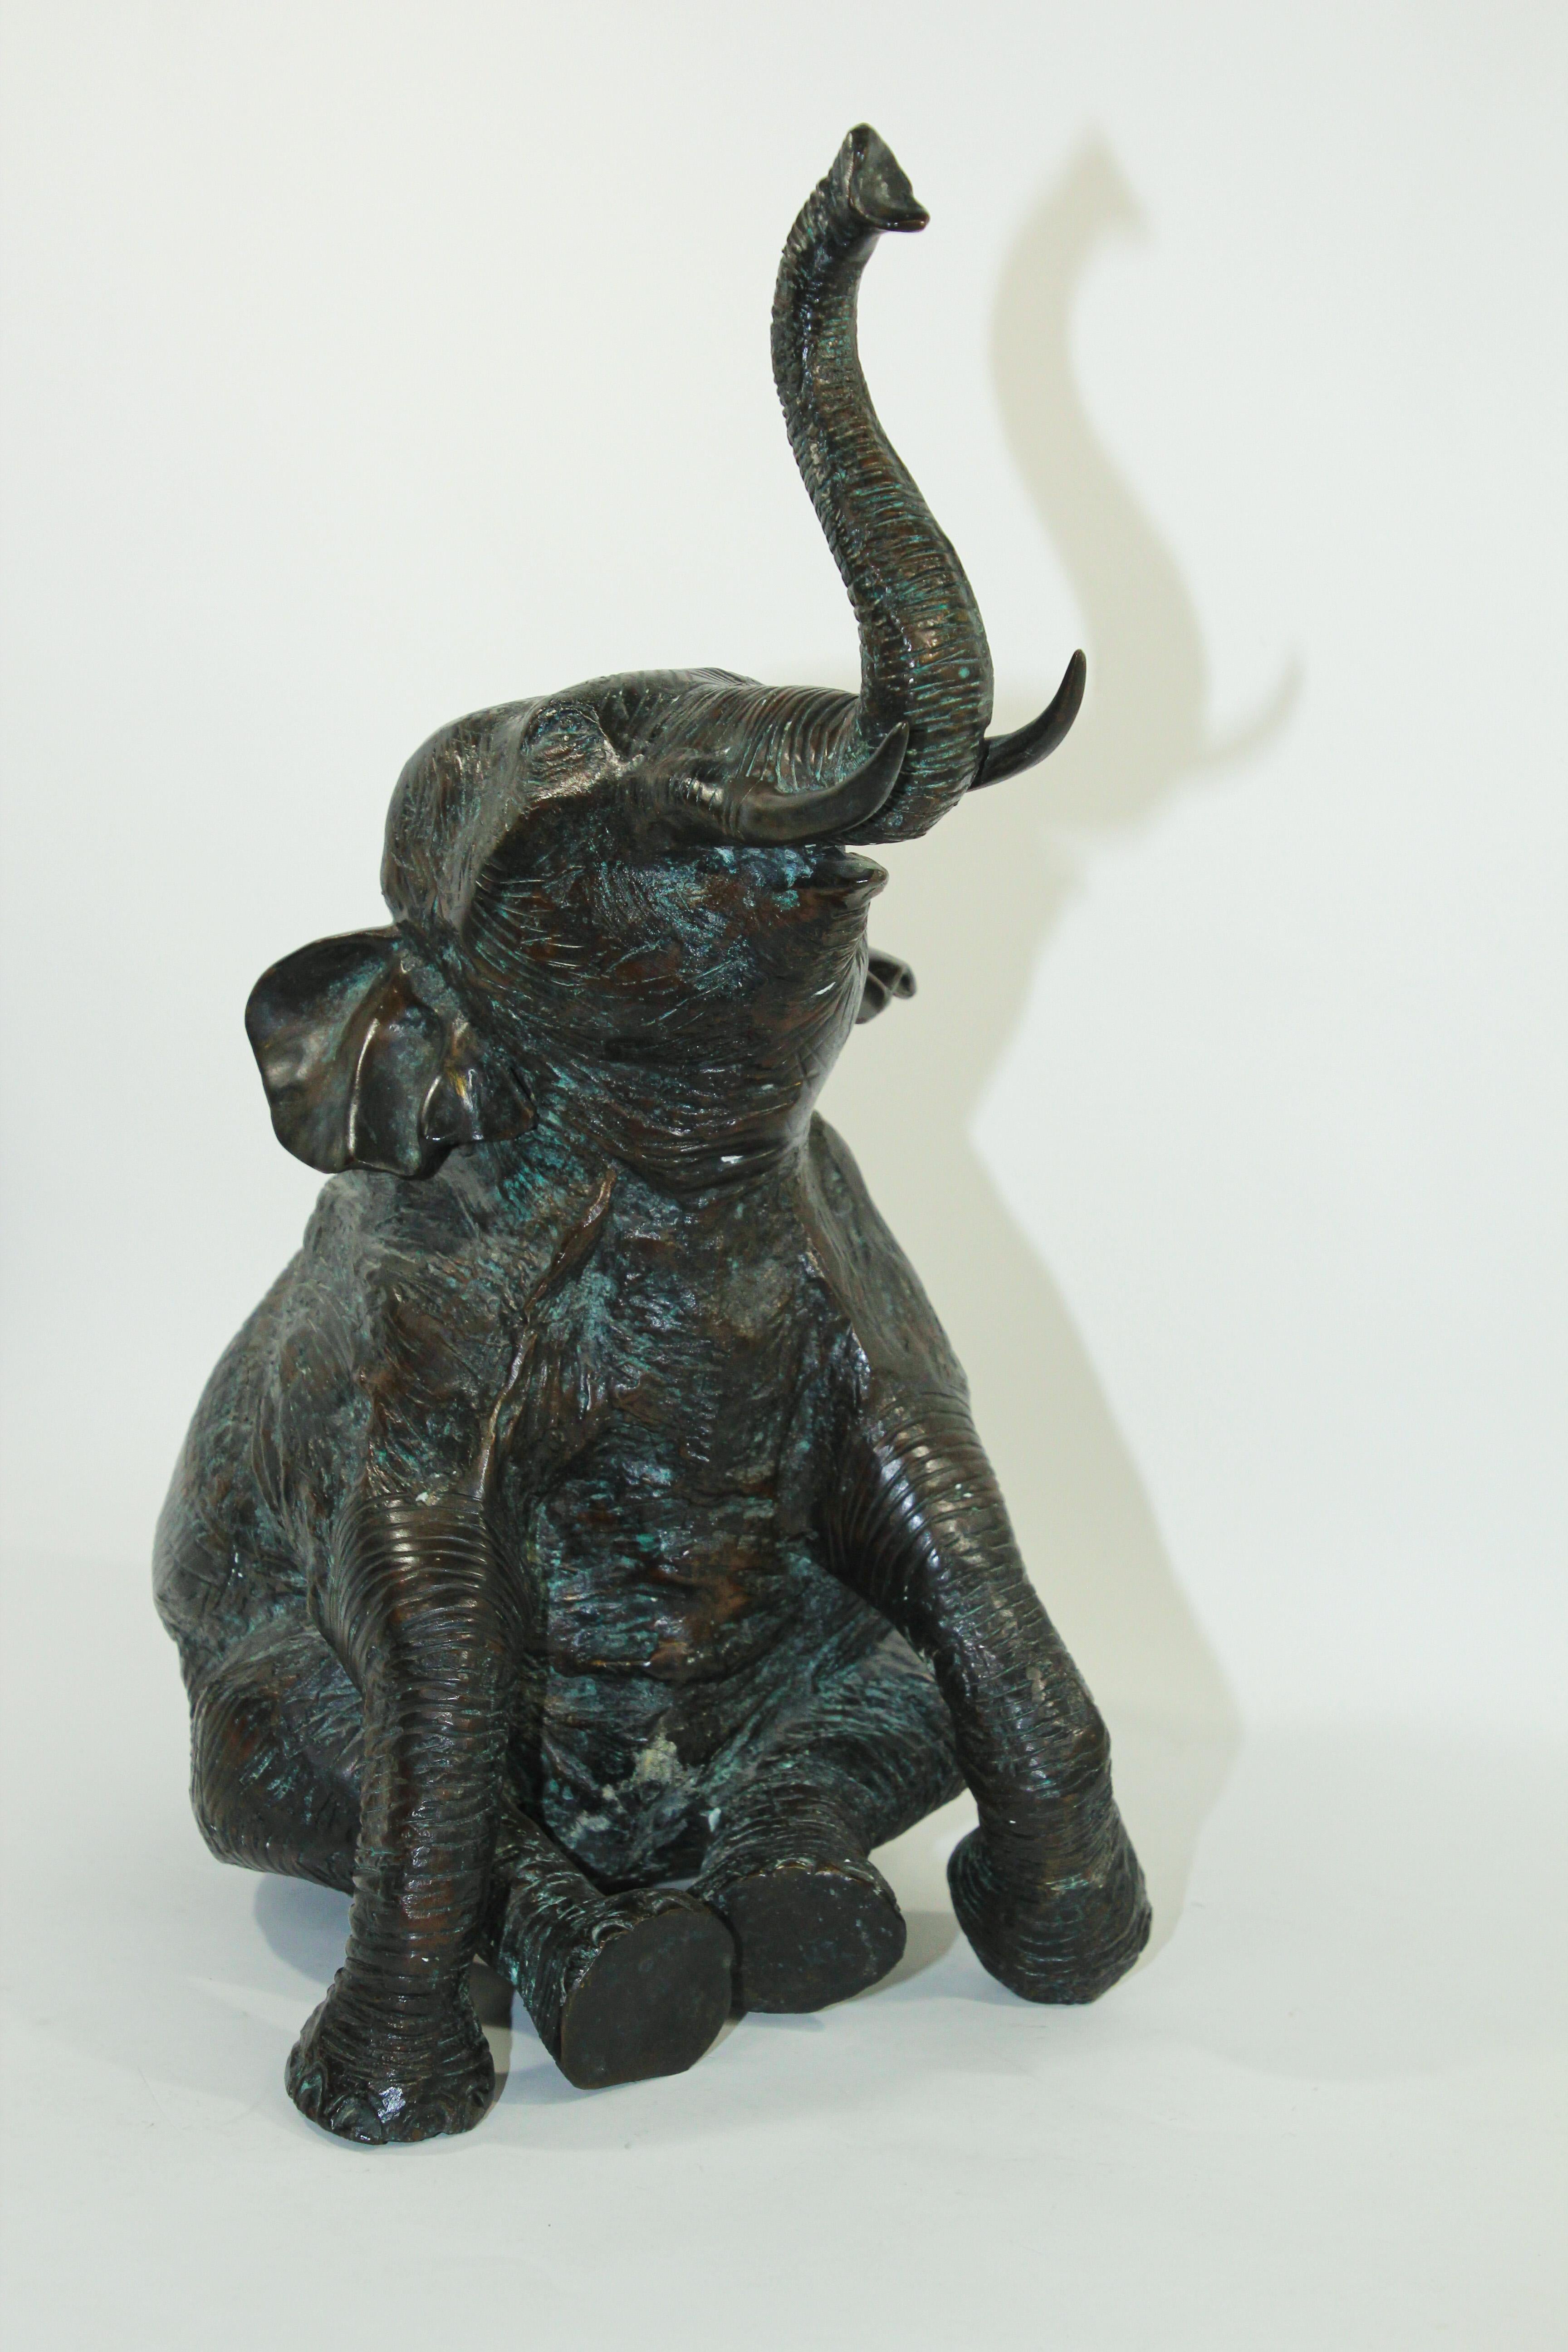 Thai Large Asian Bronze Elephant with Trunk Up